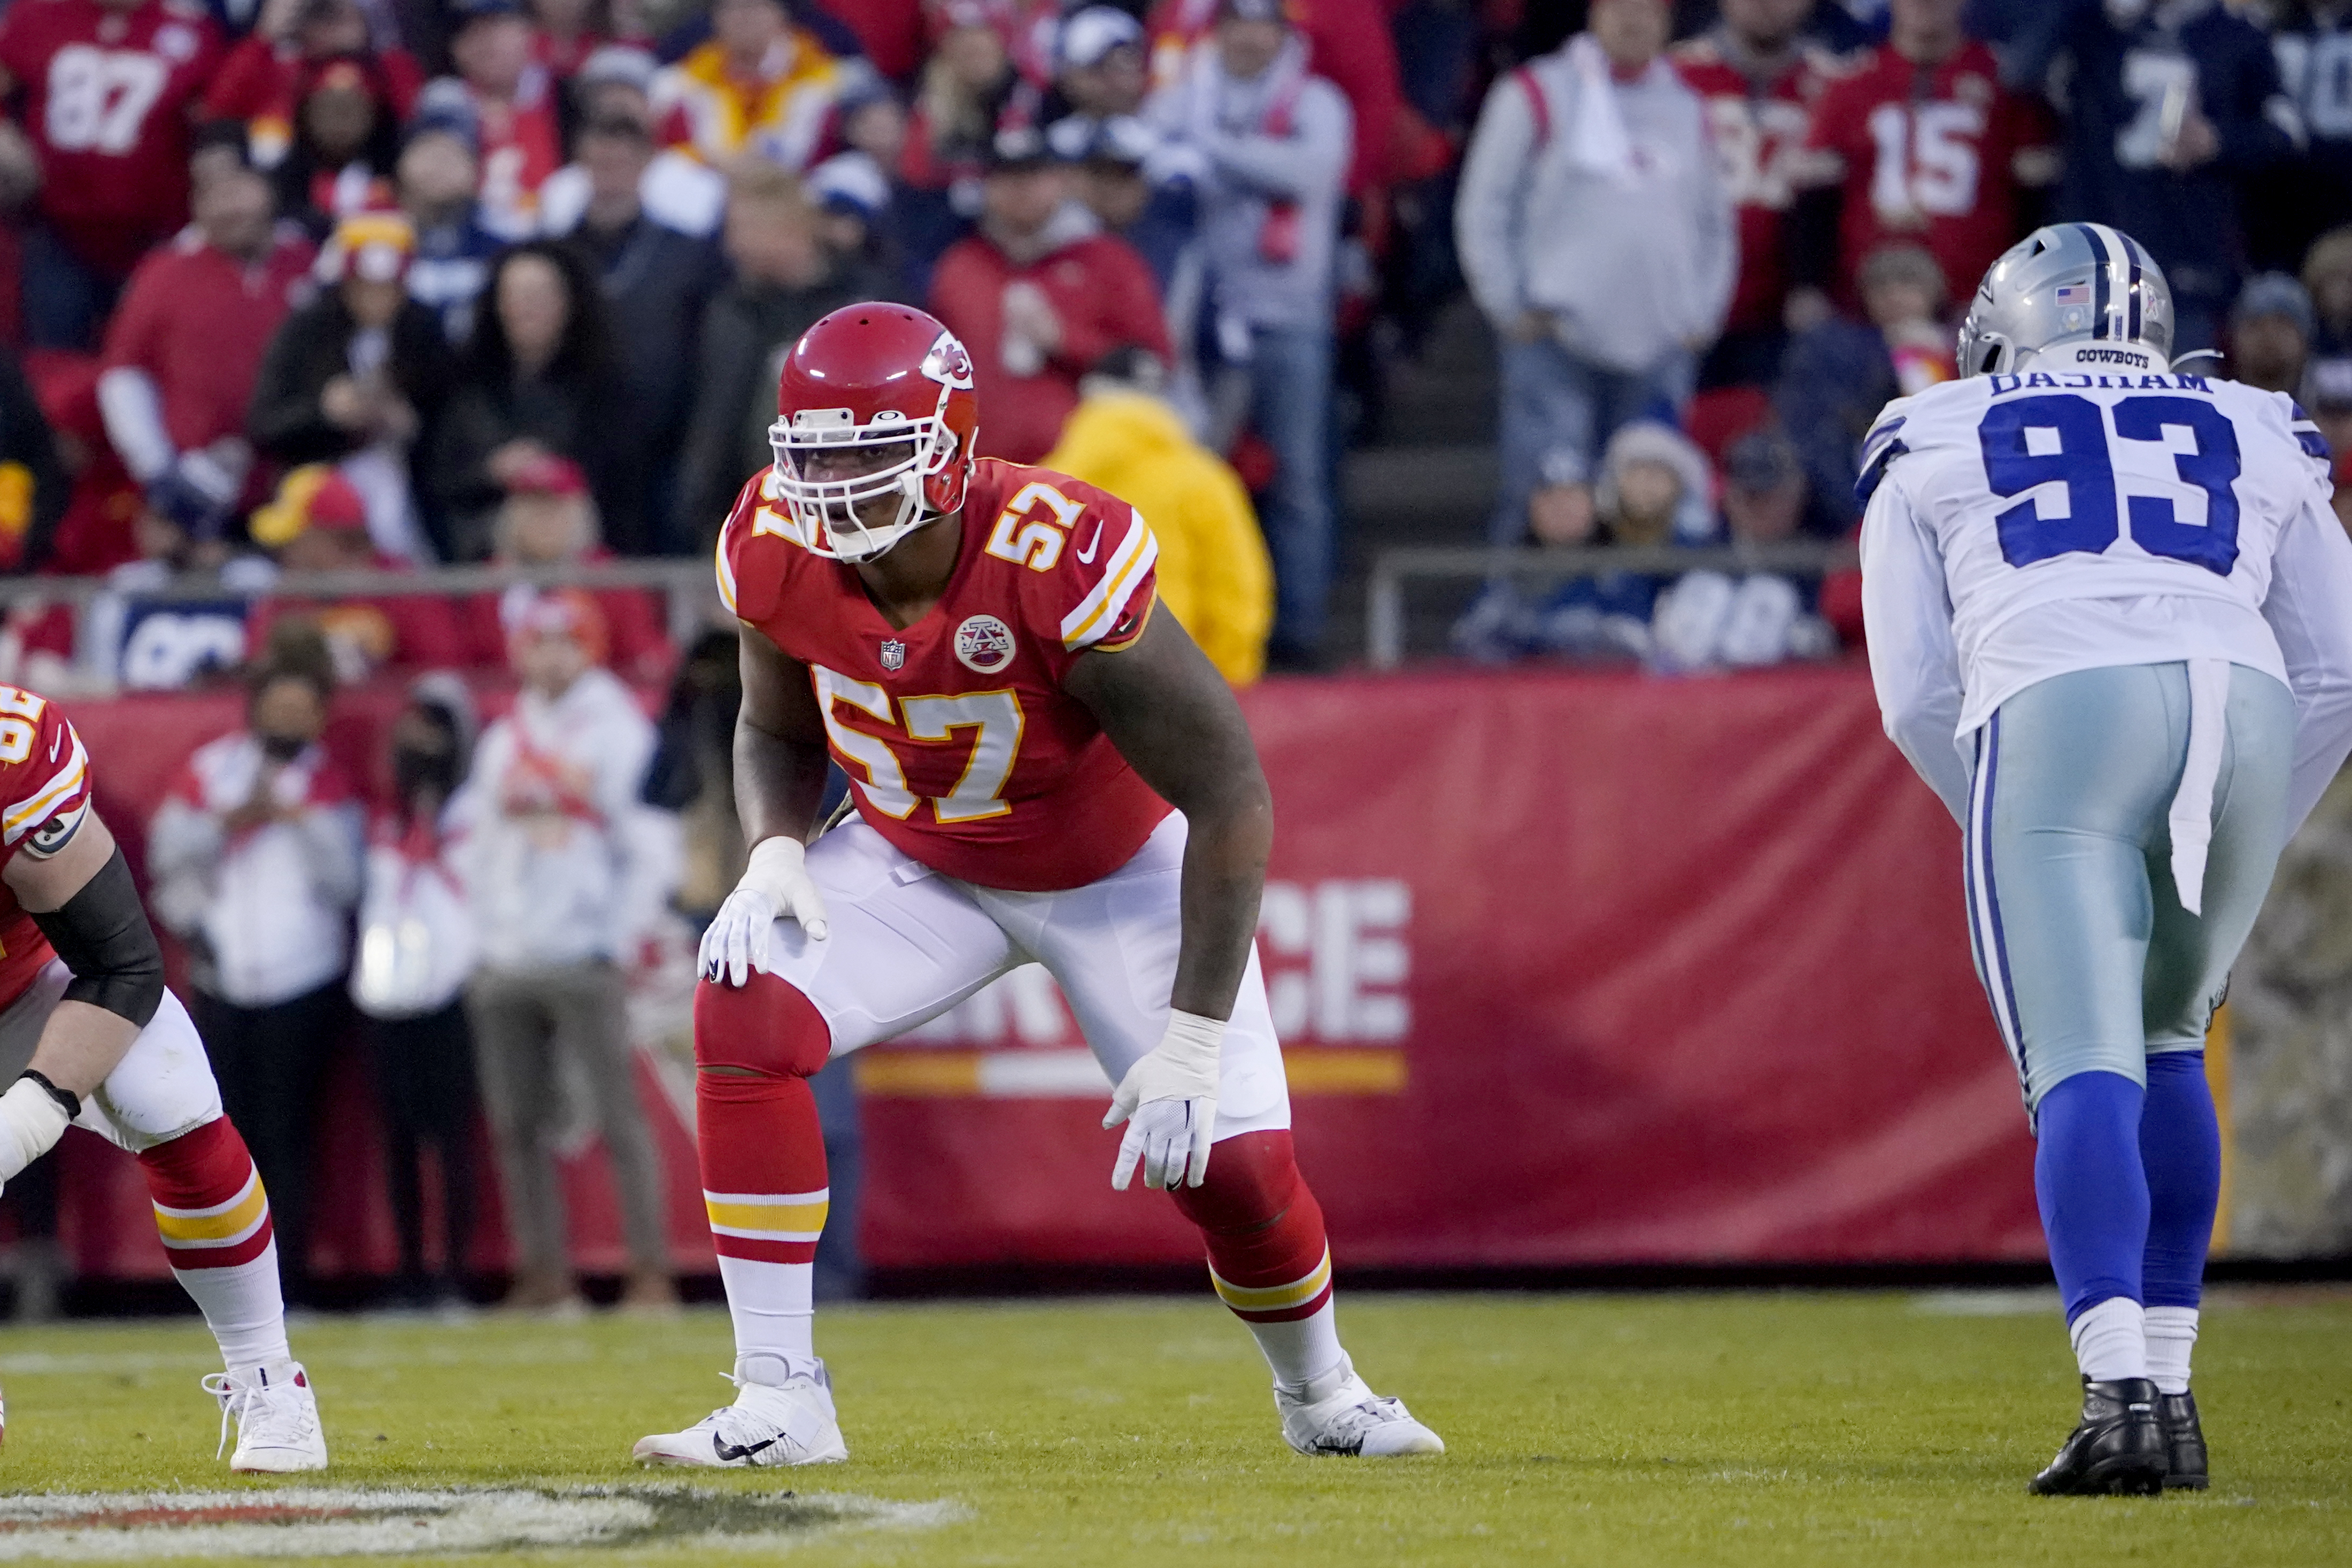 Chiefs prove they have championship mettle, yet also have plenty